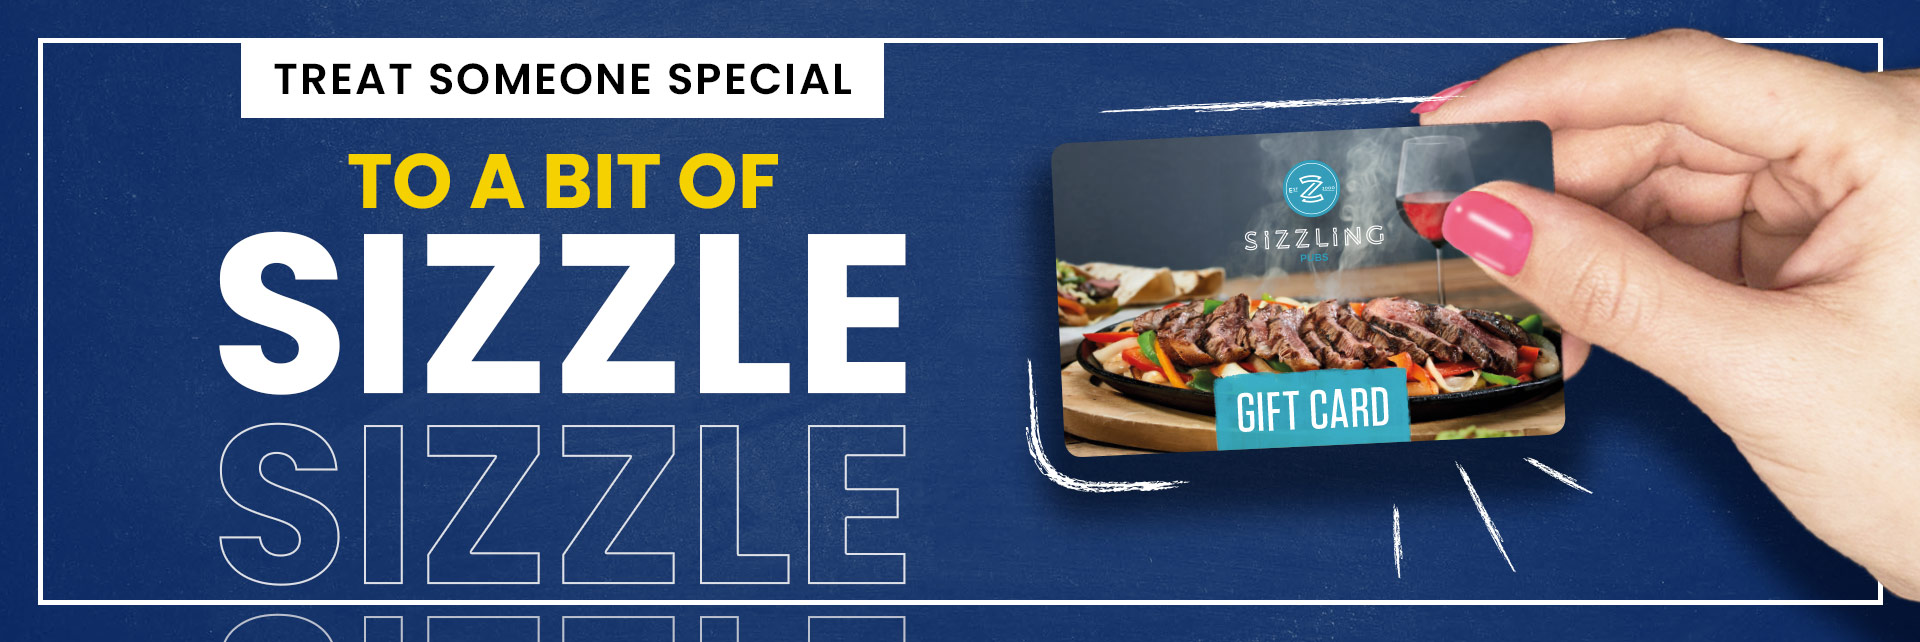 Sizzling Pubs Gift Card at The Village Inn in Cardiff